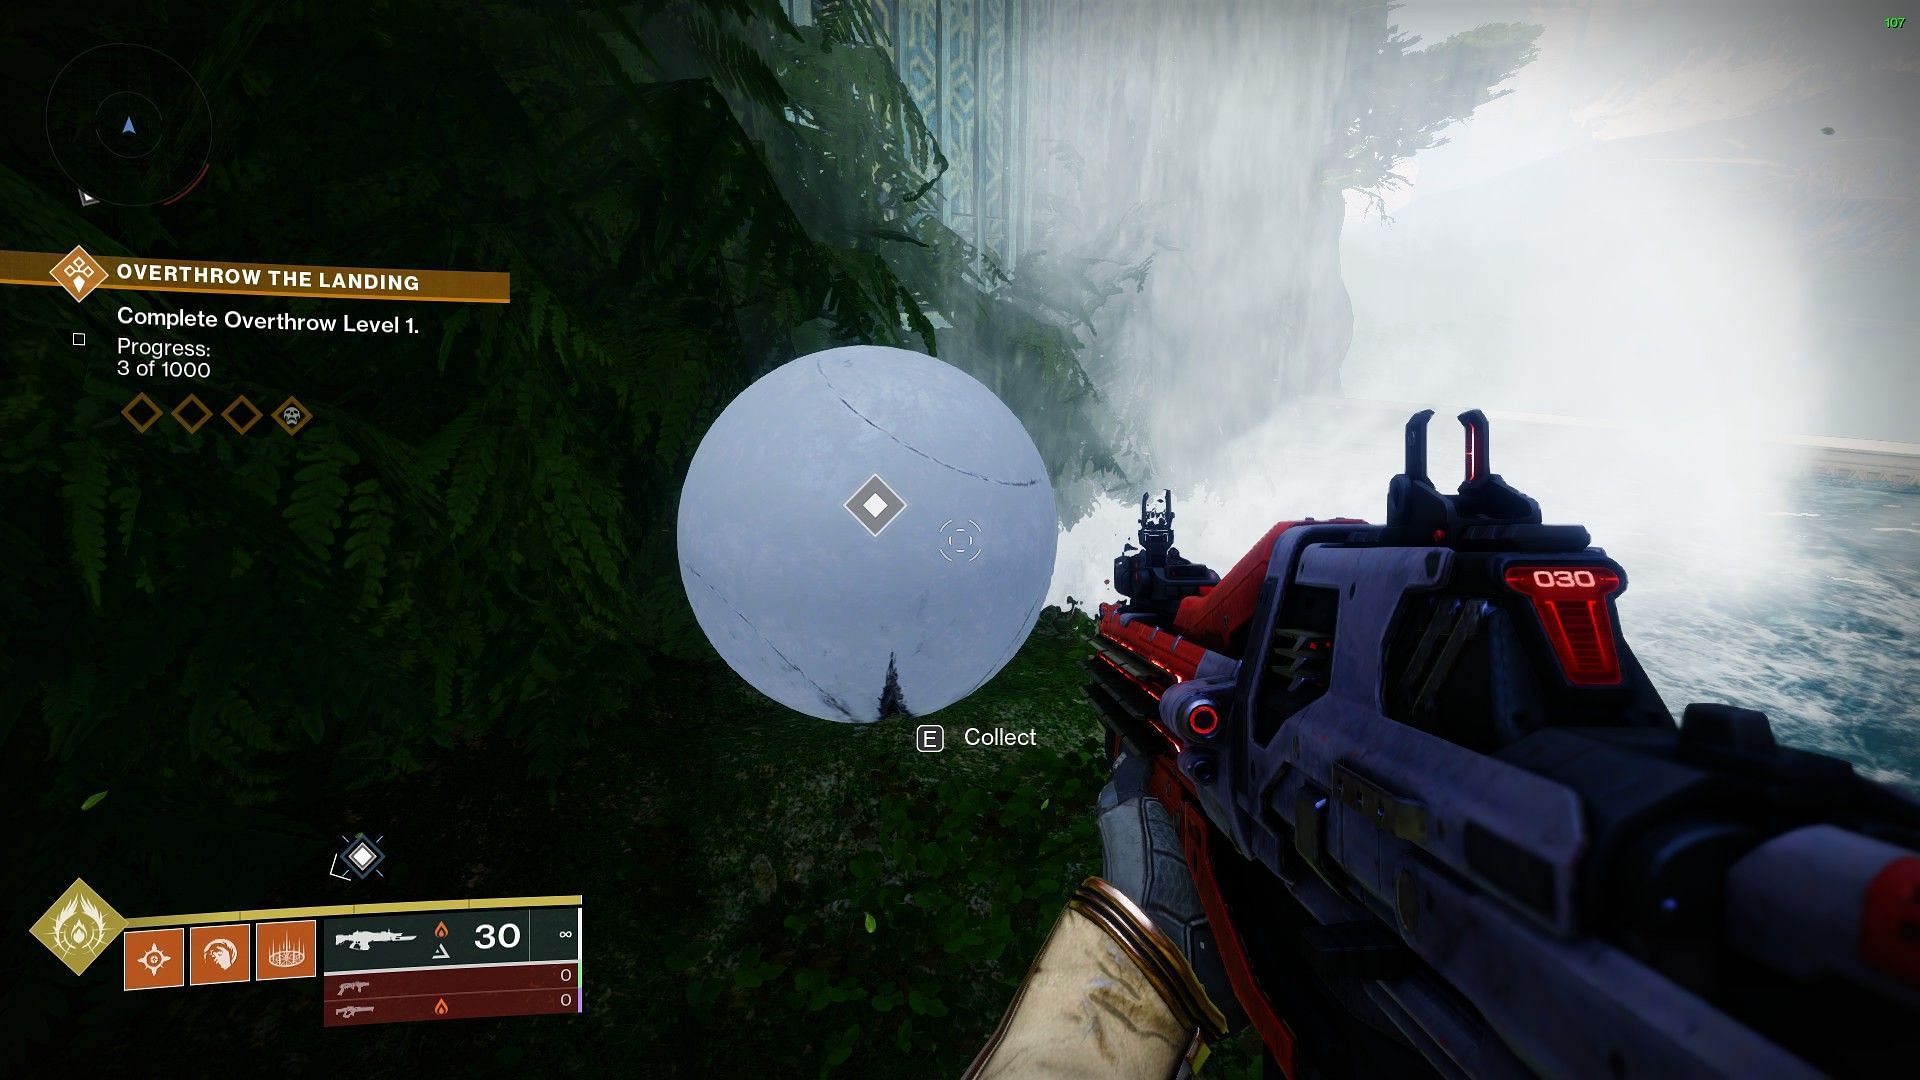 Vision on the base of a waterfall in The Landing of Destiny 2 (Image via Bungie)